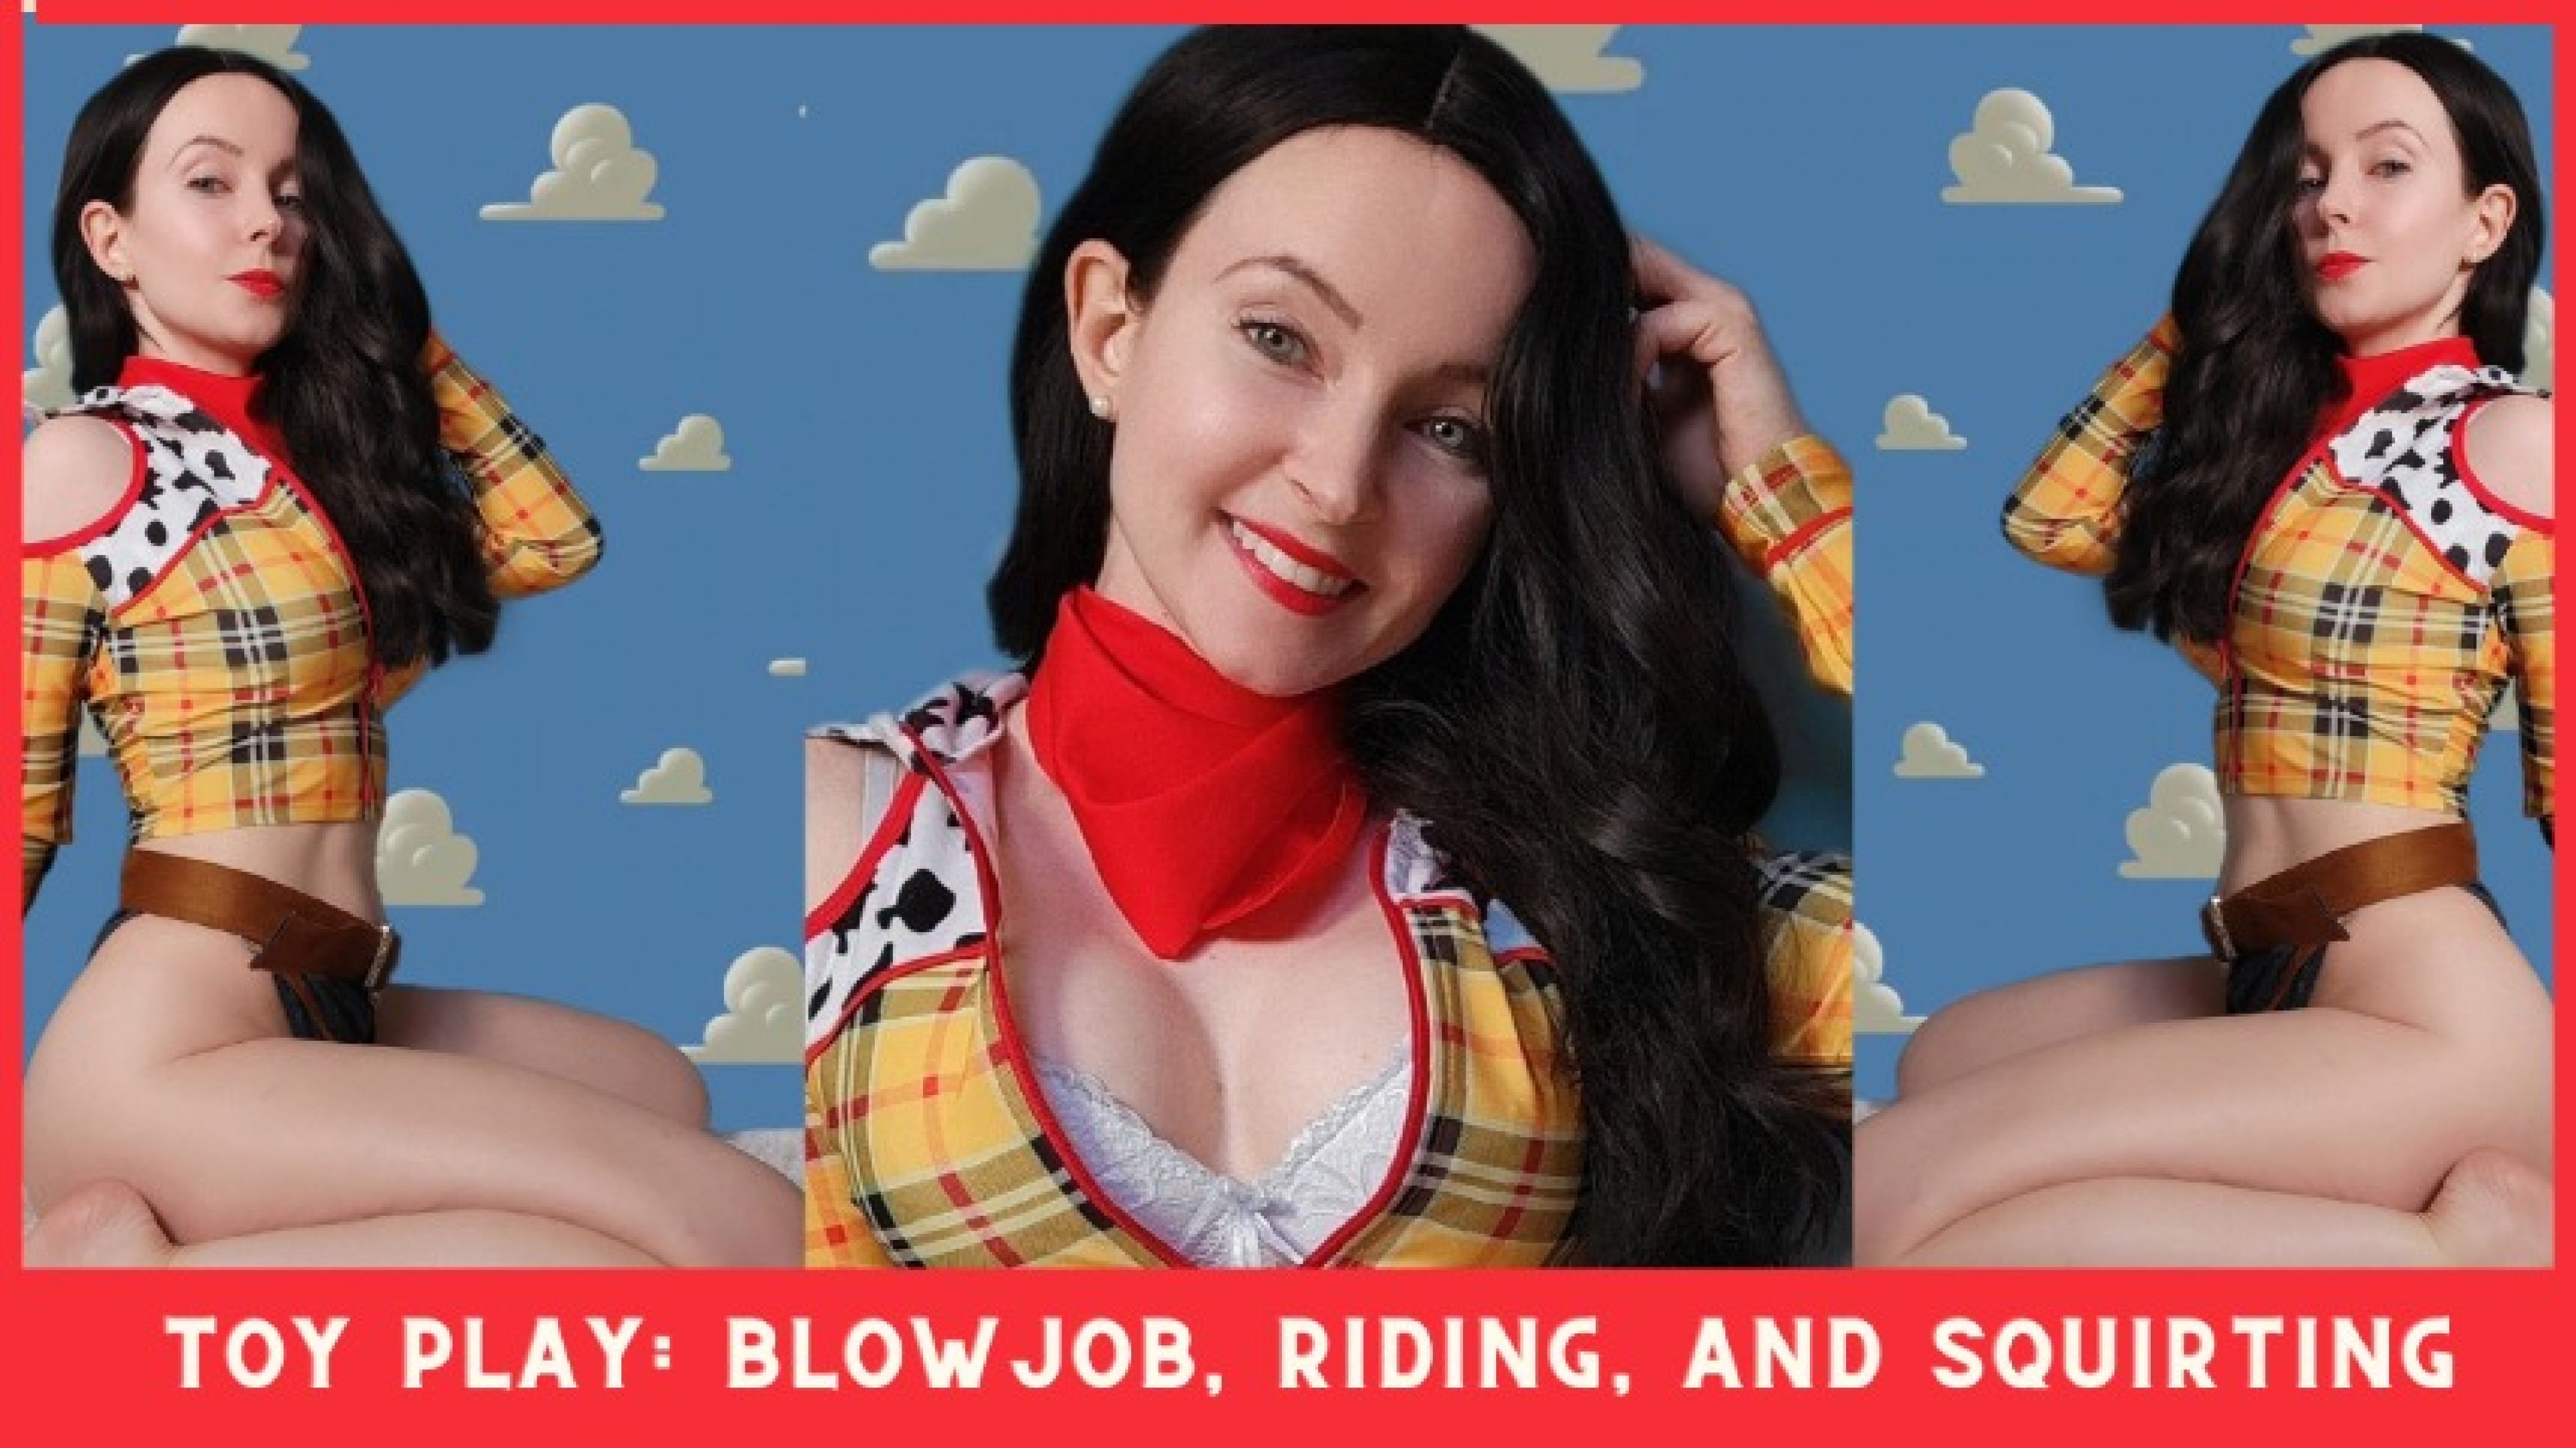 leaked Toy Play: Blowjob, Riding, and Squirting video thumbnail